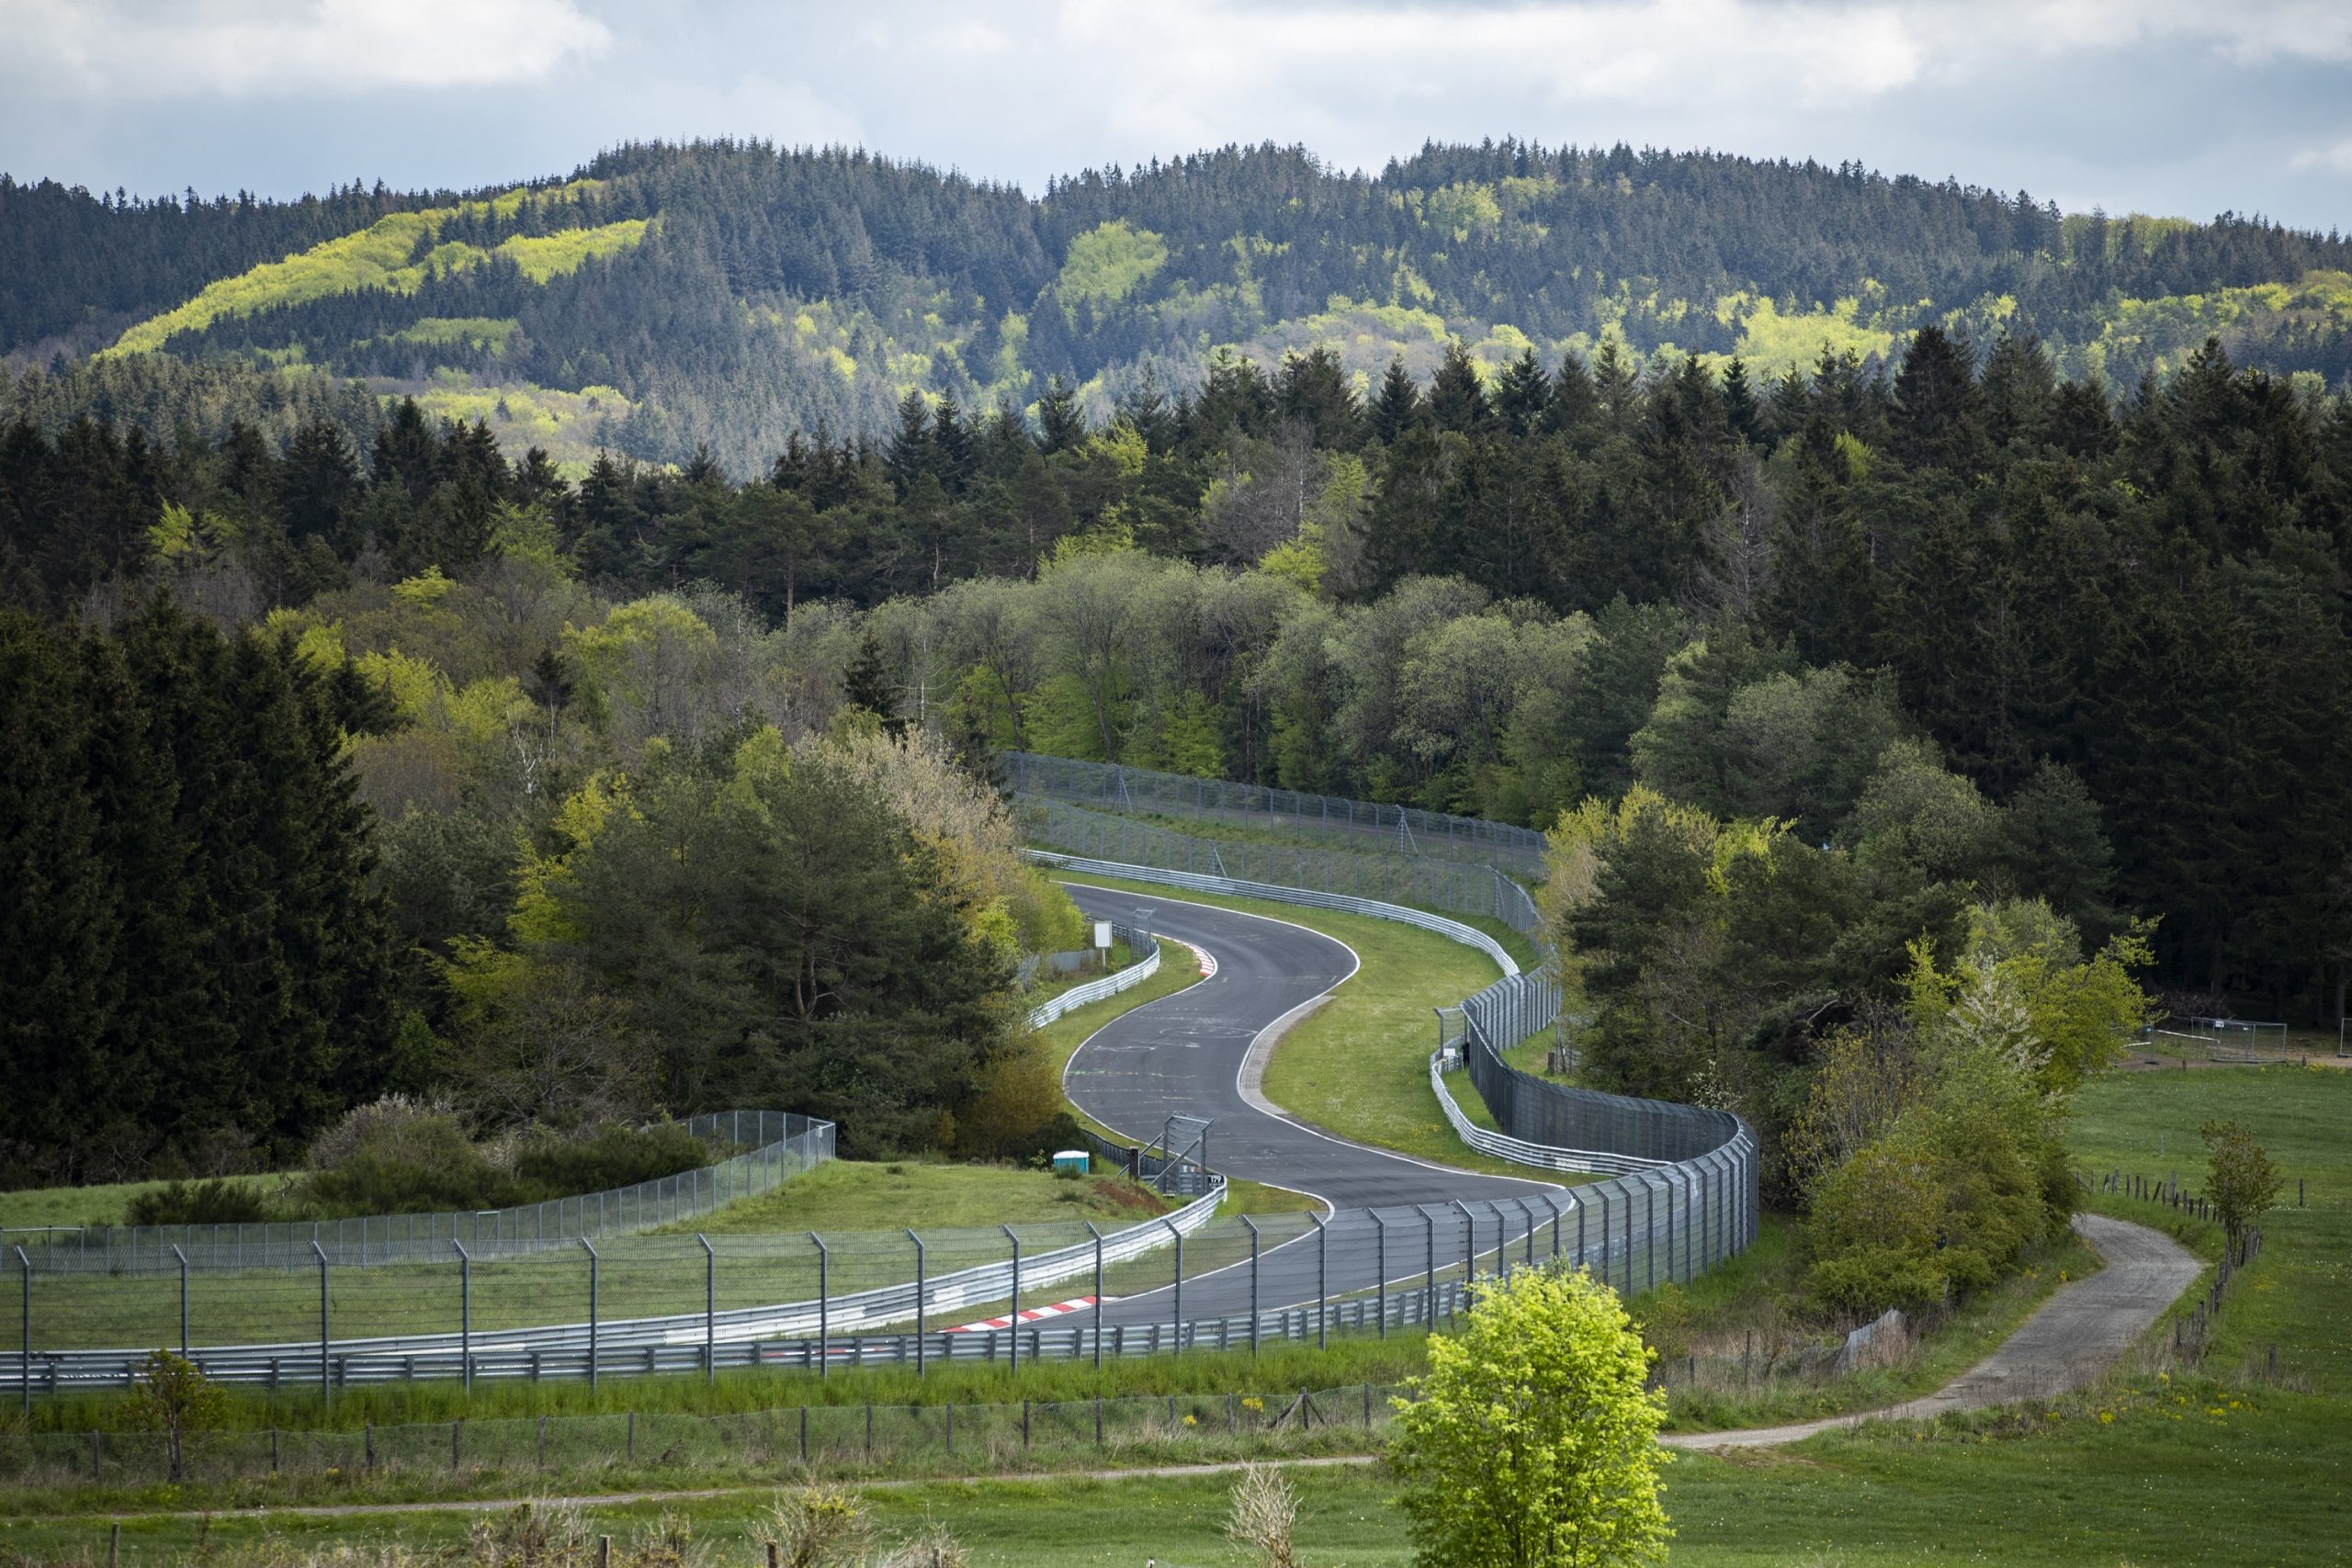 A panoramic shot of the Nurburgring Nordschleife in Germany on a clear day